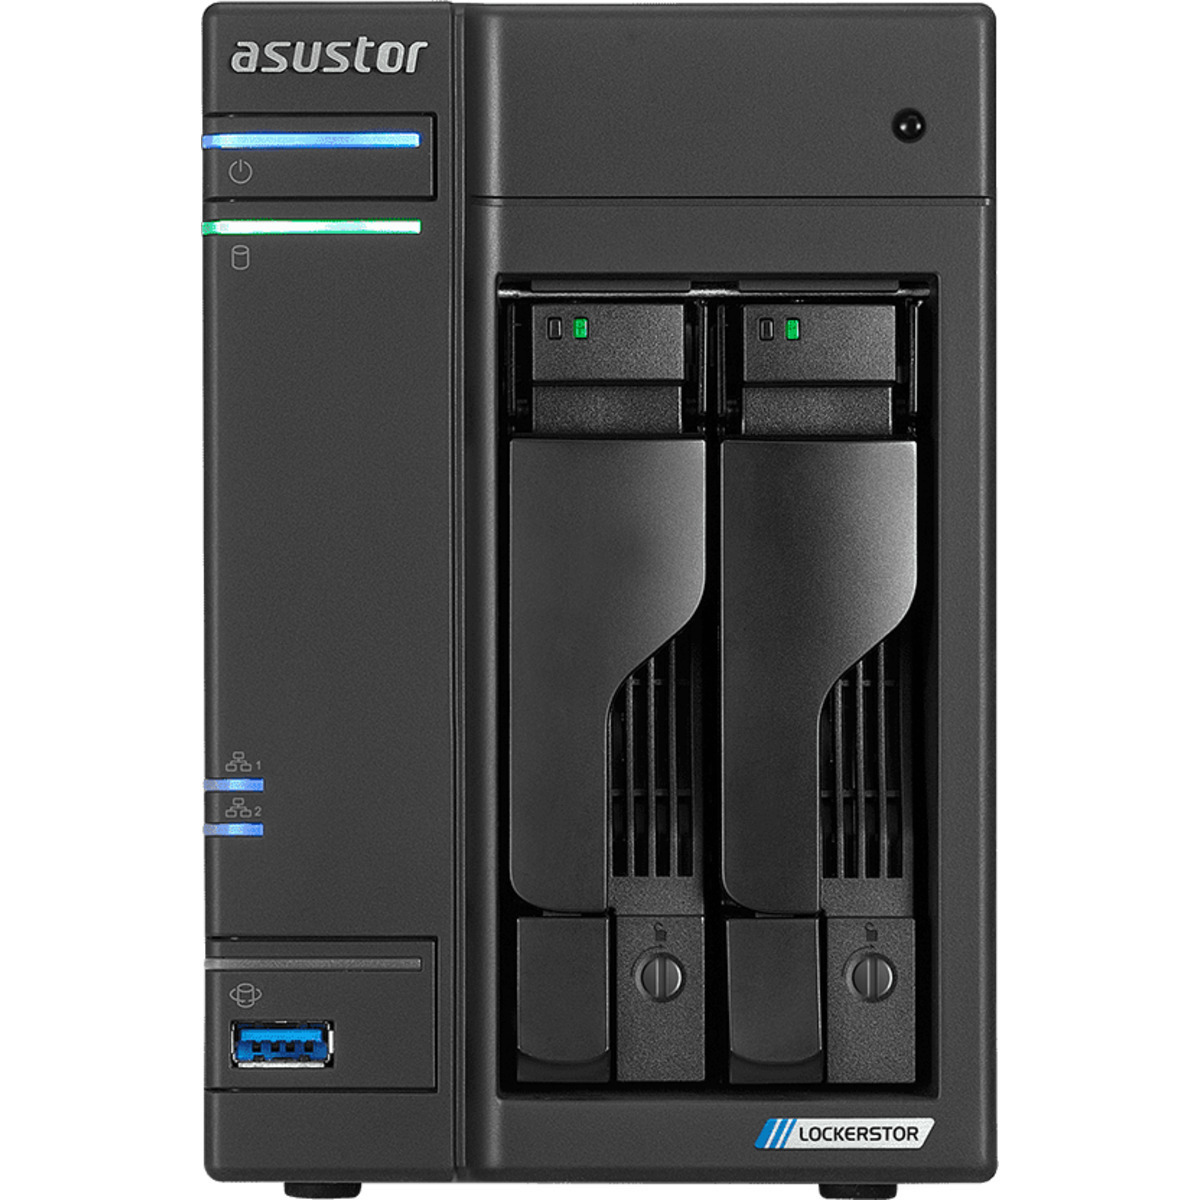 ASUSTOR AS6602T Lockerstor 2 36tb 2-Bay Desktop Multimedia / Power User / Business NAS - Network Attached Storage Device 2x18tb Seagate IronWolf Pro ST18000NT001 3.5 7200rpm SATA 6Gb/s HDD NAS Class Drives Installed - Burn-In Tested - FREE RAM UPGRADE AS6602T Lockerstor 2